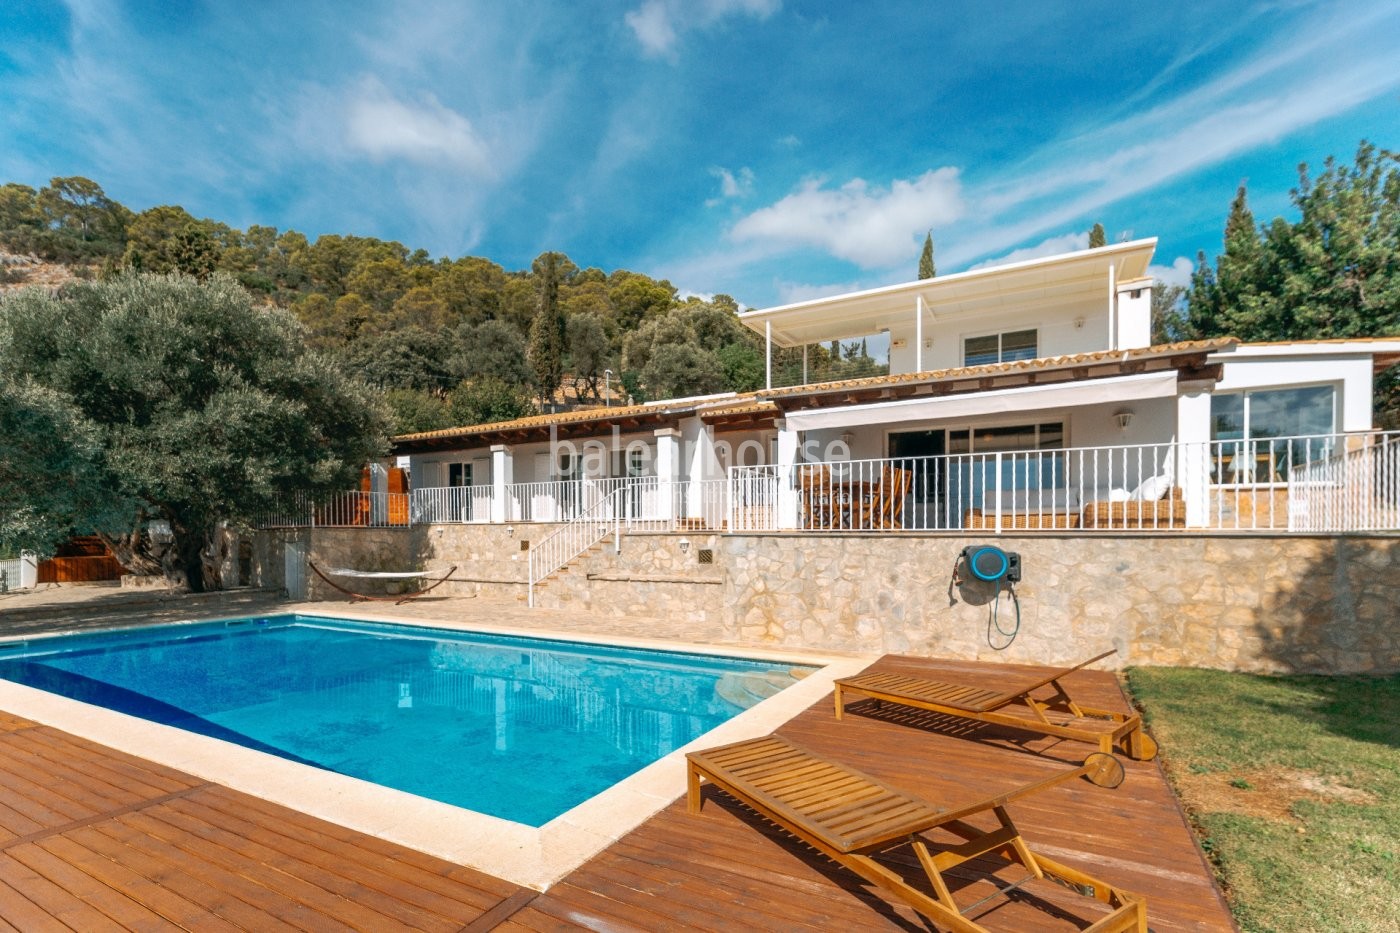 Beautiful mediterranean villa in Bunyola with great views to the mountains and the sea.